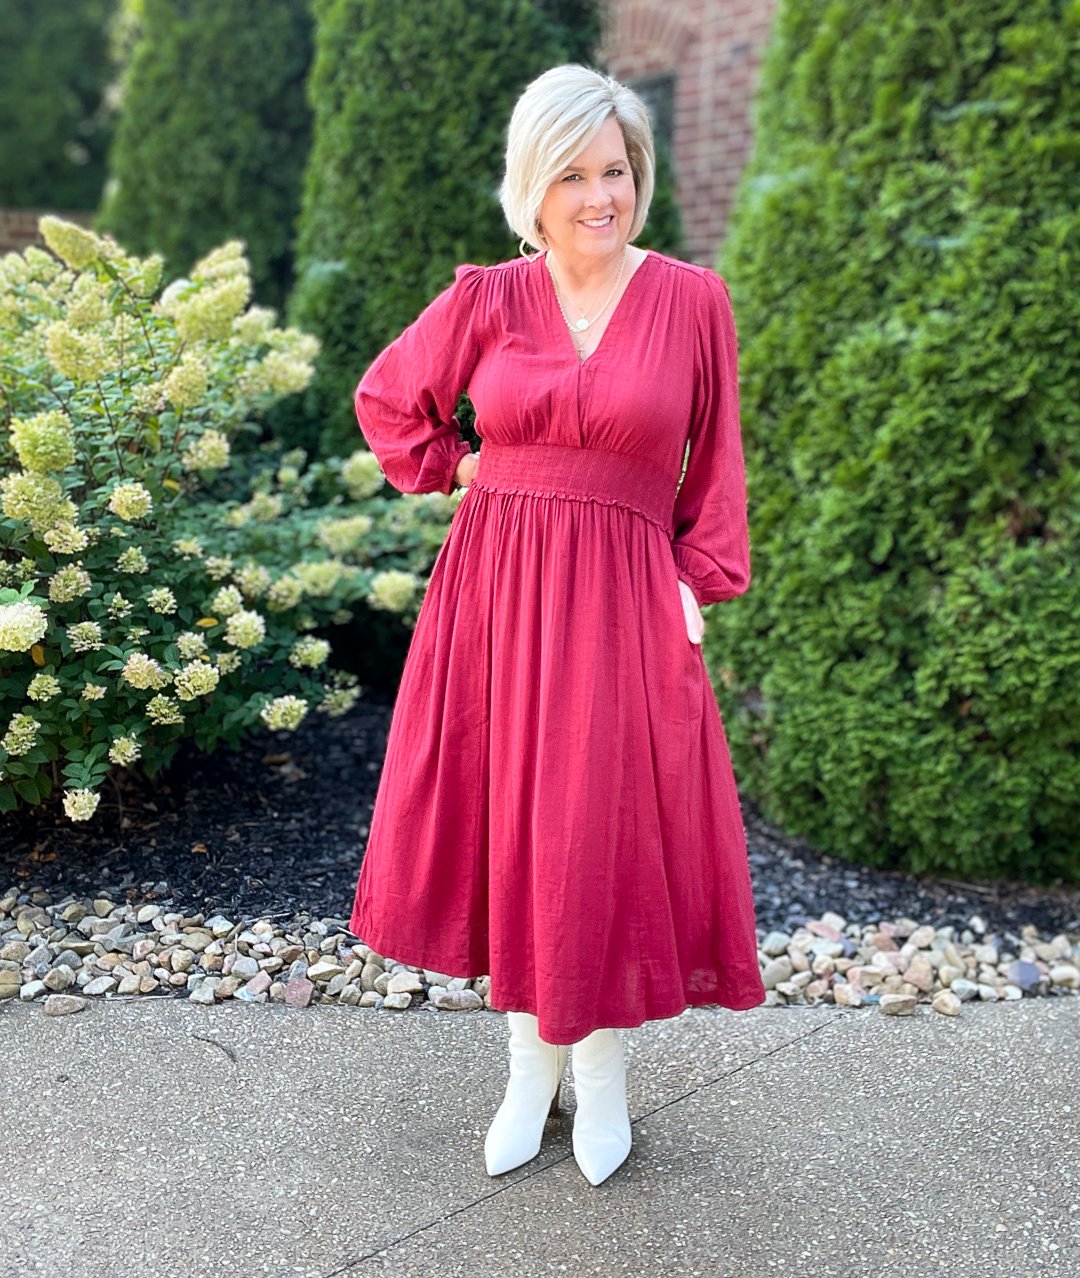 Over 40 Fashion Blogger, Tania Stephens is styling Old Navy Fall Dresses with western boots 6